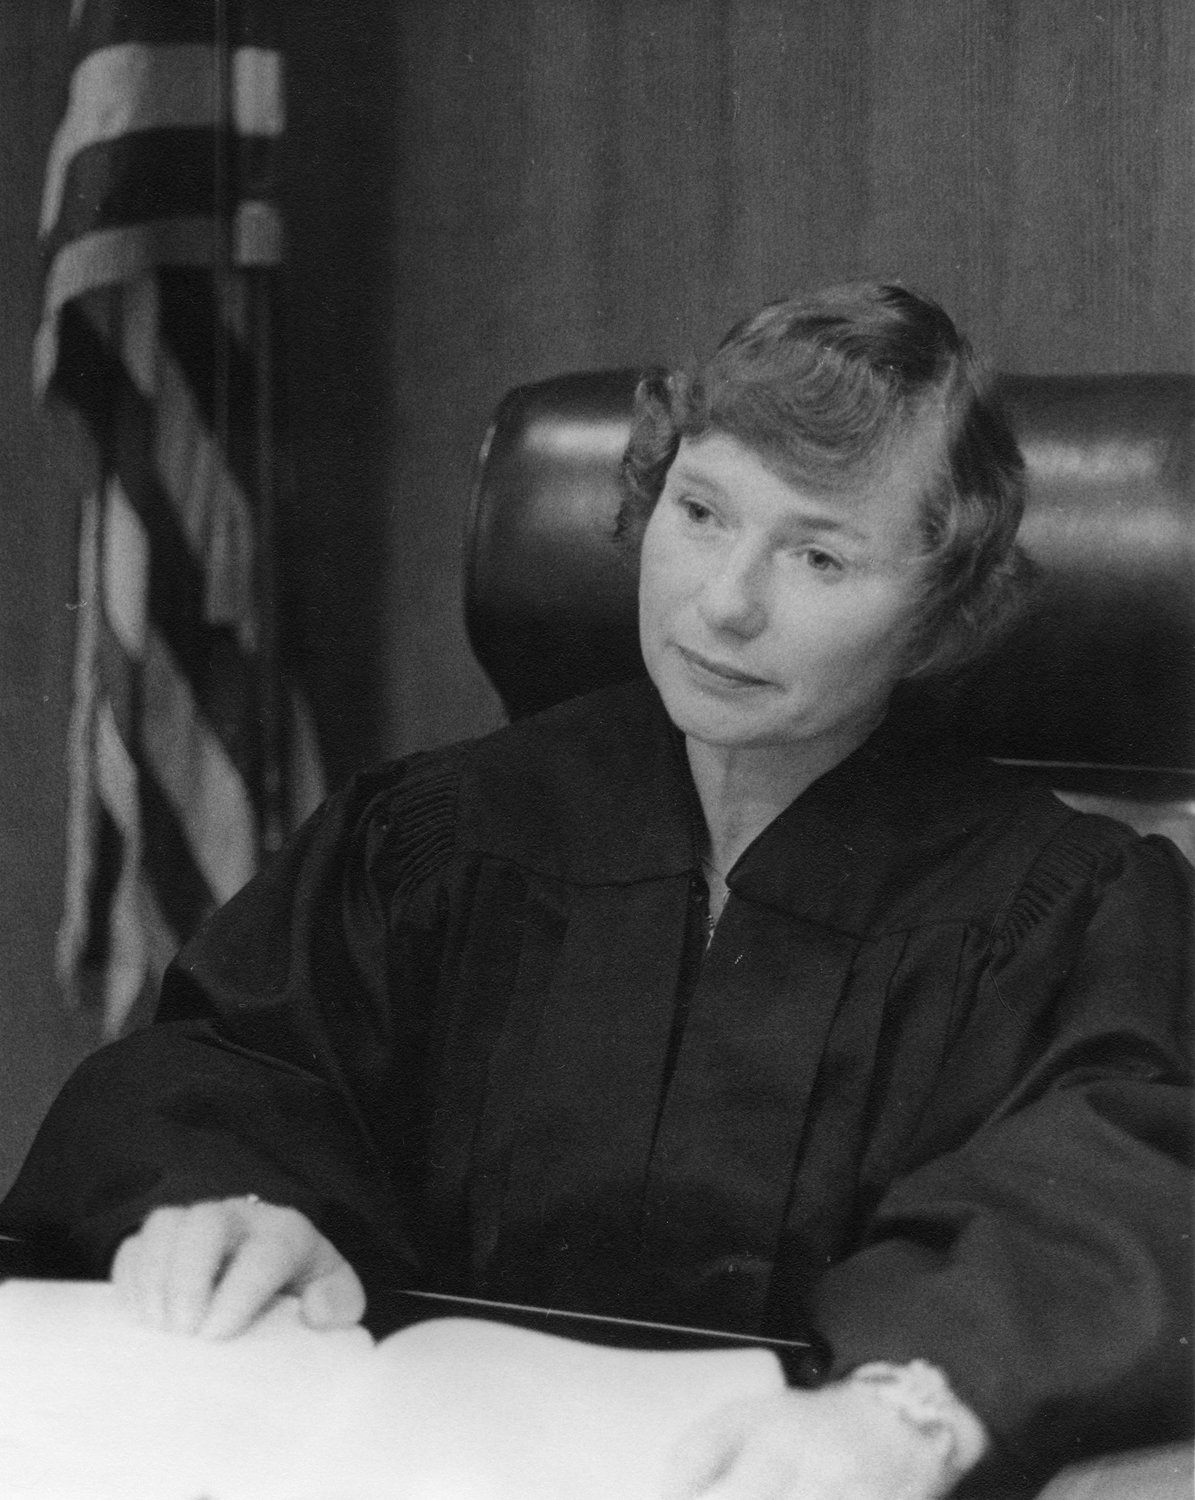 Thurston County Superior Court mourns the passing of Judge Carol Fuller